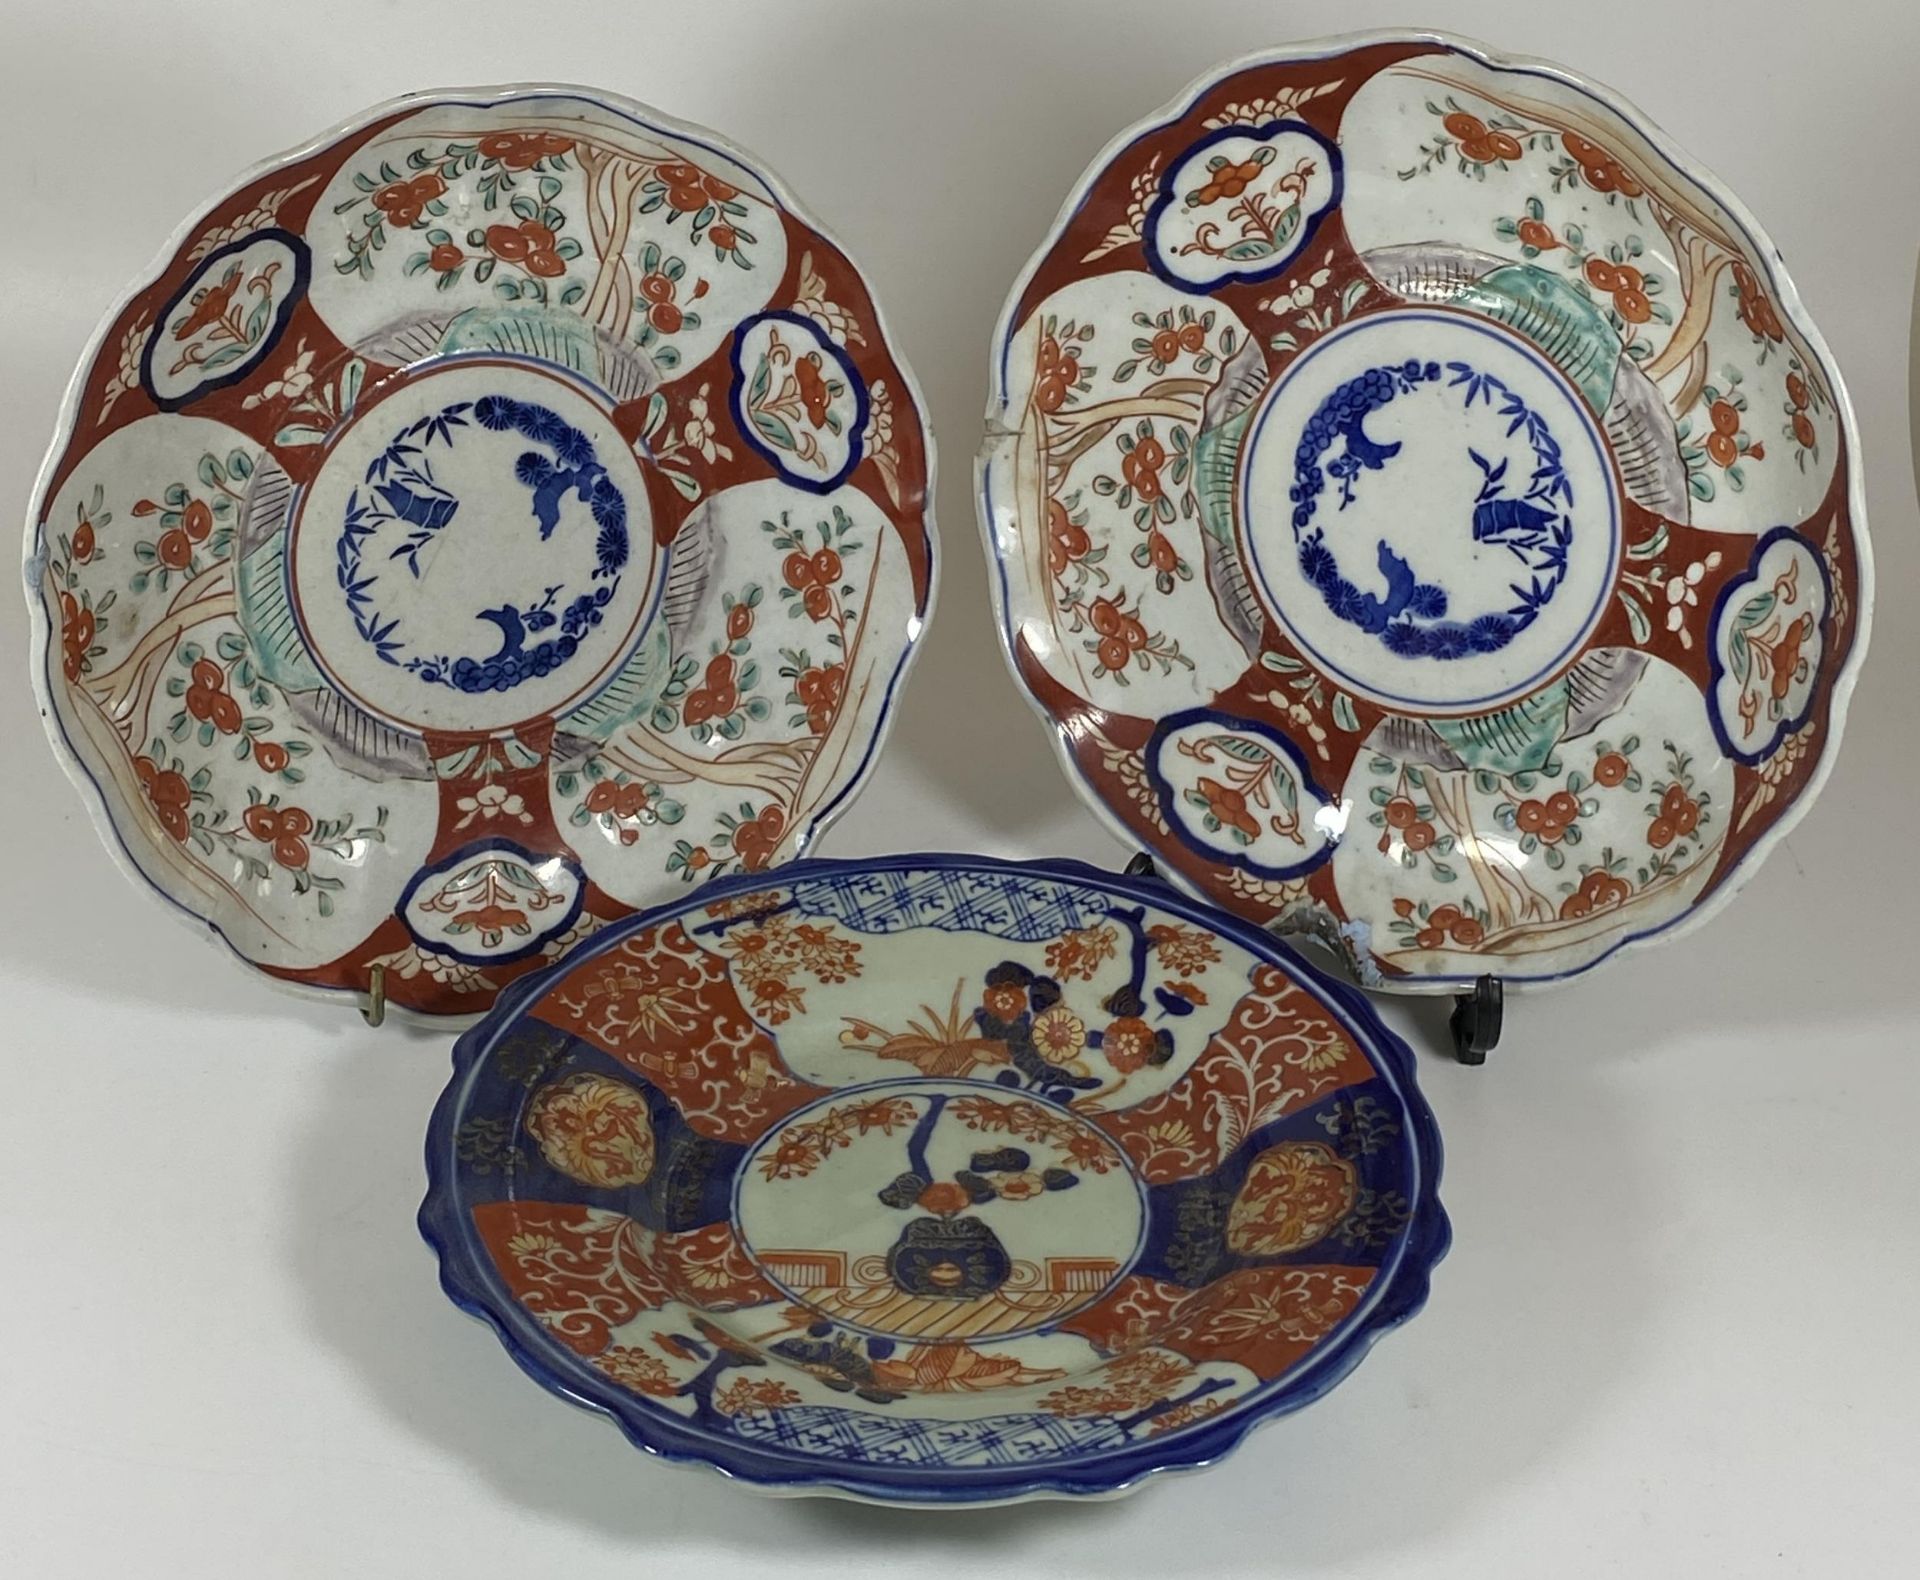 THREE JAPANESE IMARI PLATES - PAIR OF MEIJI PERIOD SCALLOPED RIM EXAMPLES AND A LATER EXAMPLE WITH